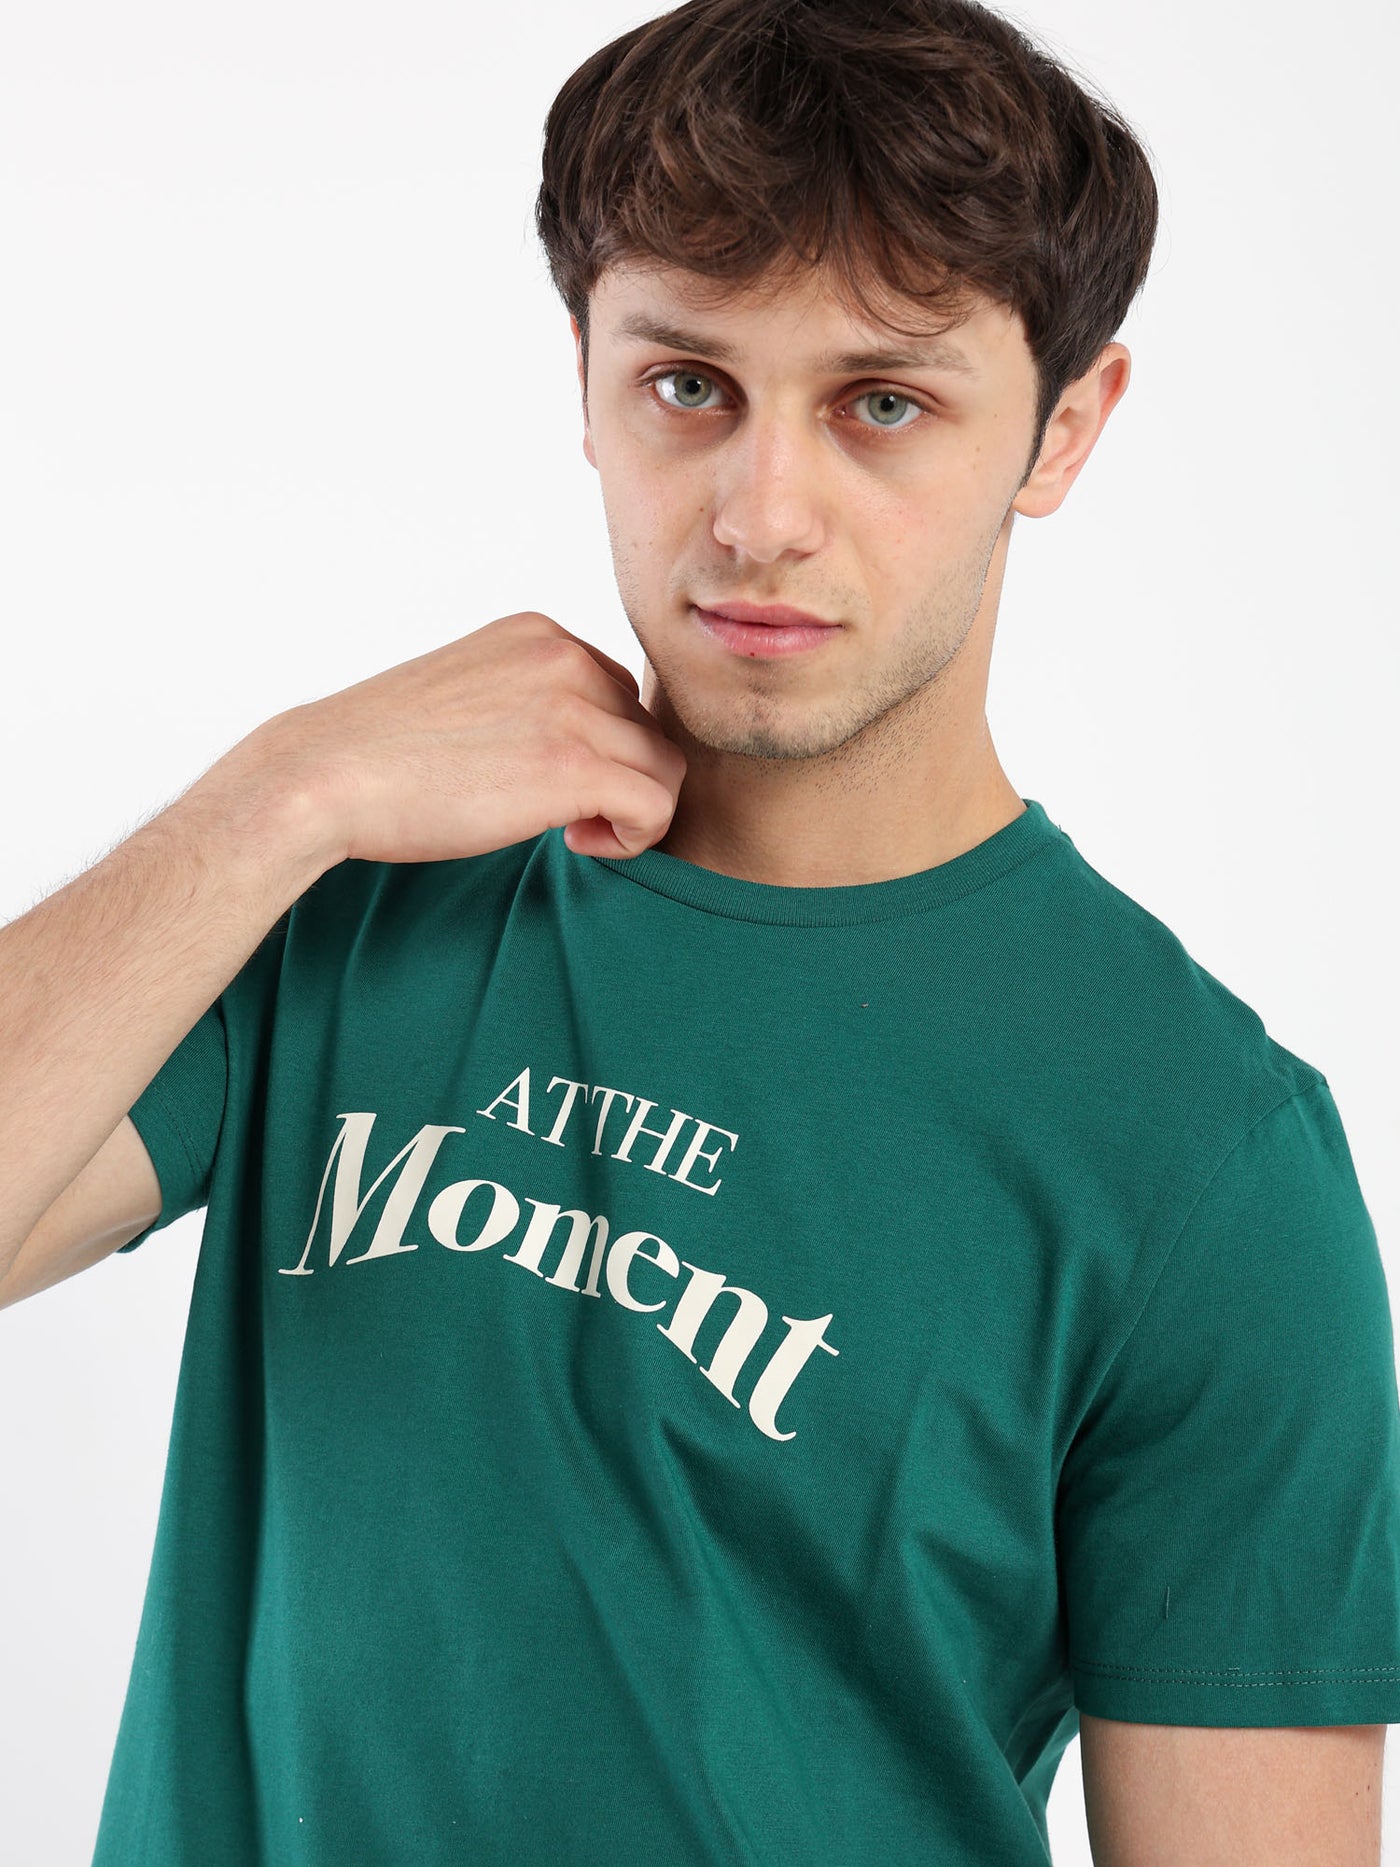 T-Shirt - "At The Moment" Front Print - Round Neck